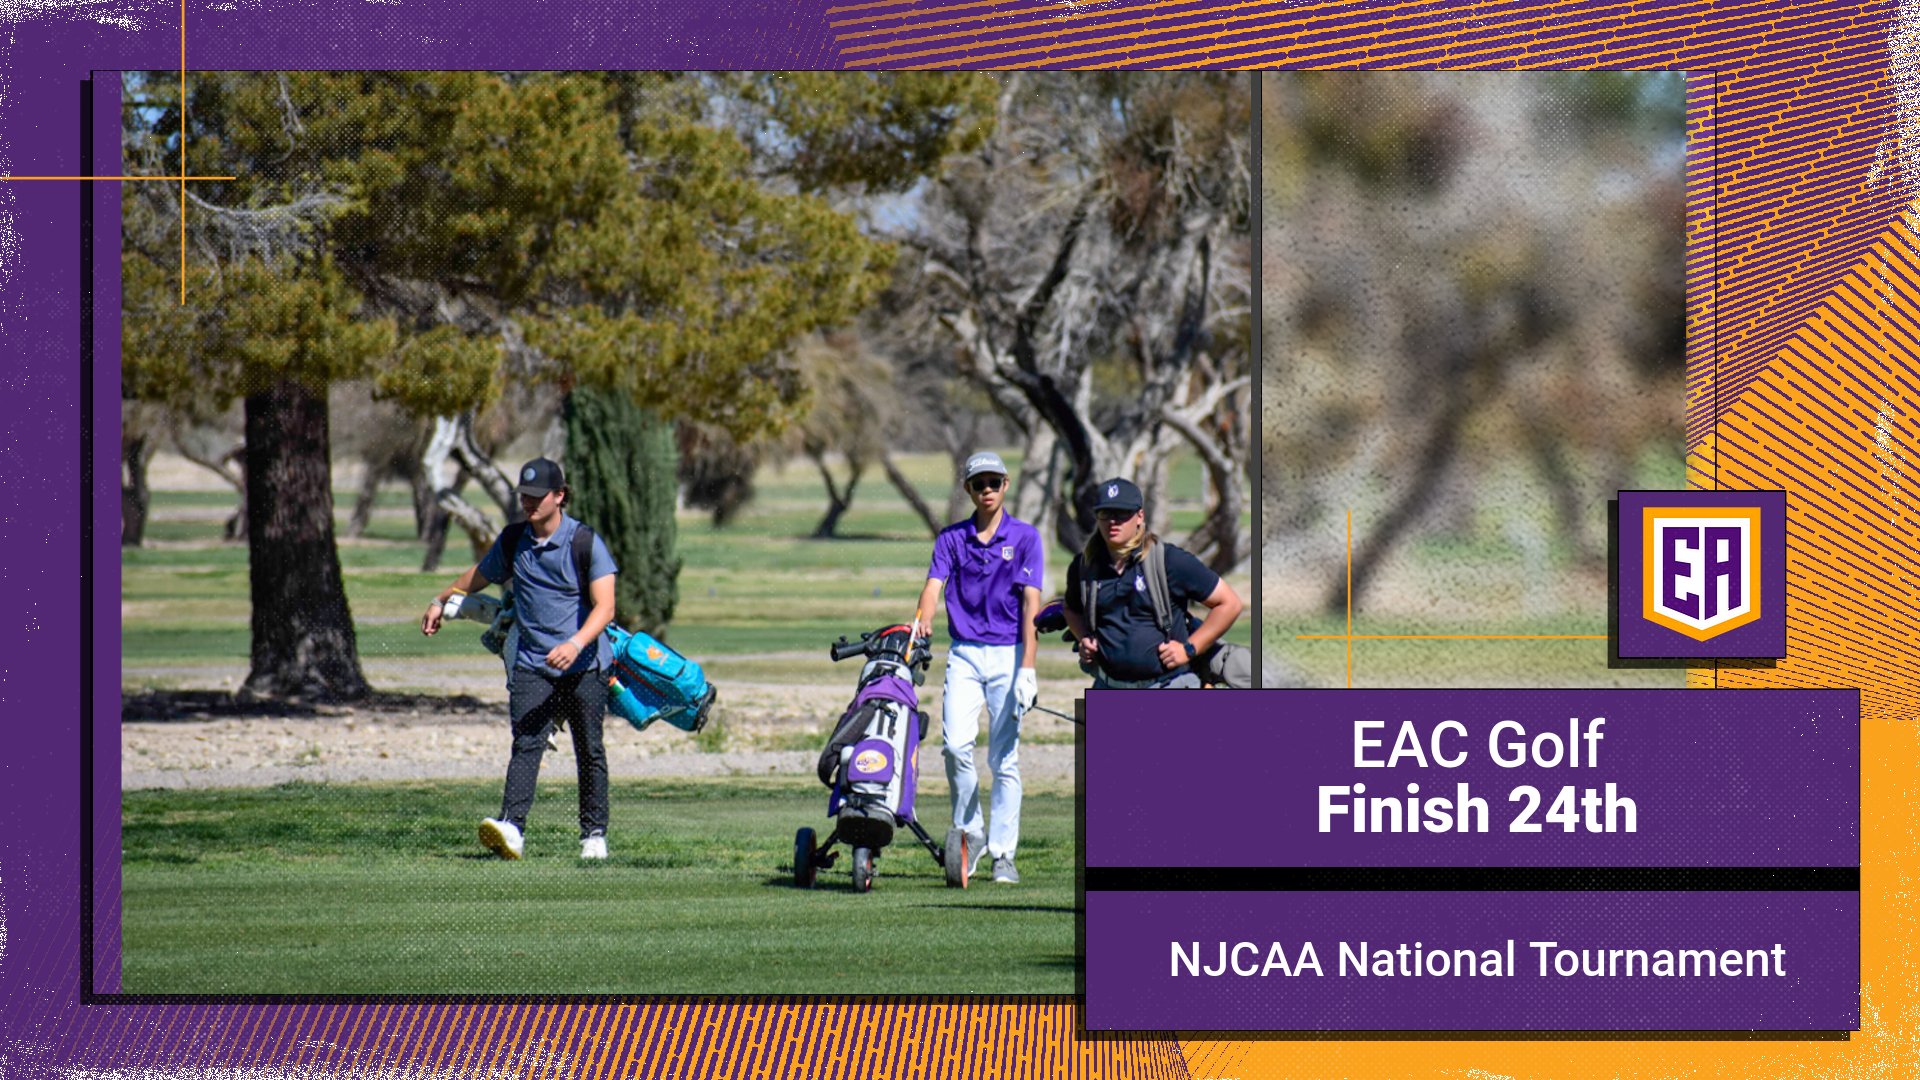 Golf Finishes 24th in NJCAA National Tournament